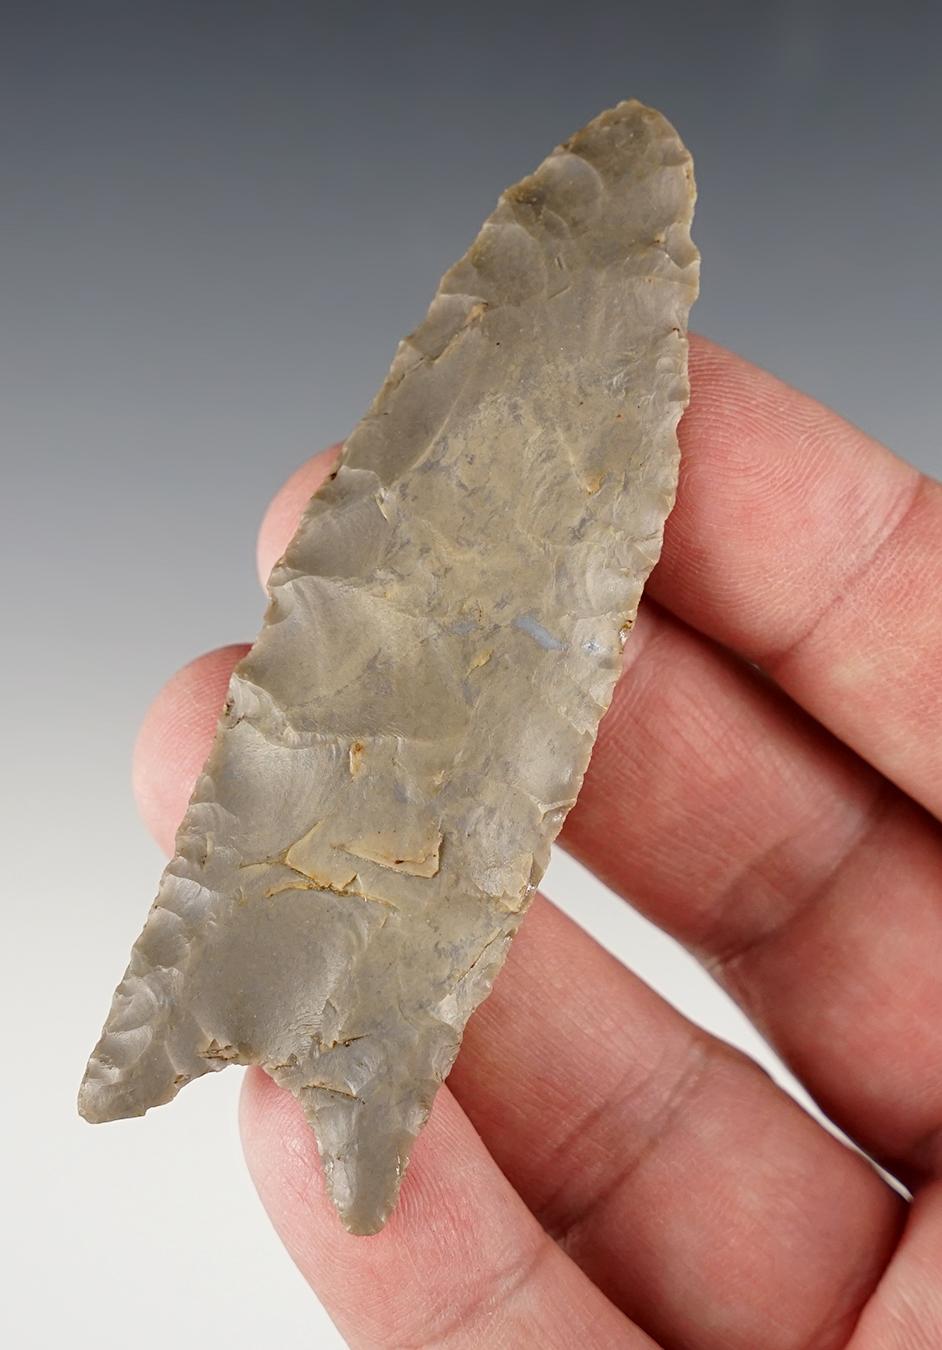 Classic 3 3/8" Paleo Fluted Clovis that is very well made. Found in Whitley Co., Indiana.